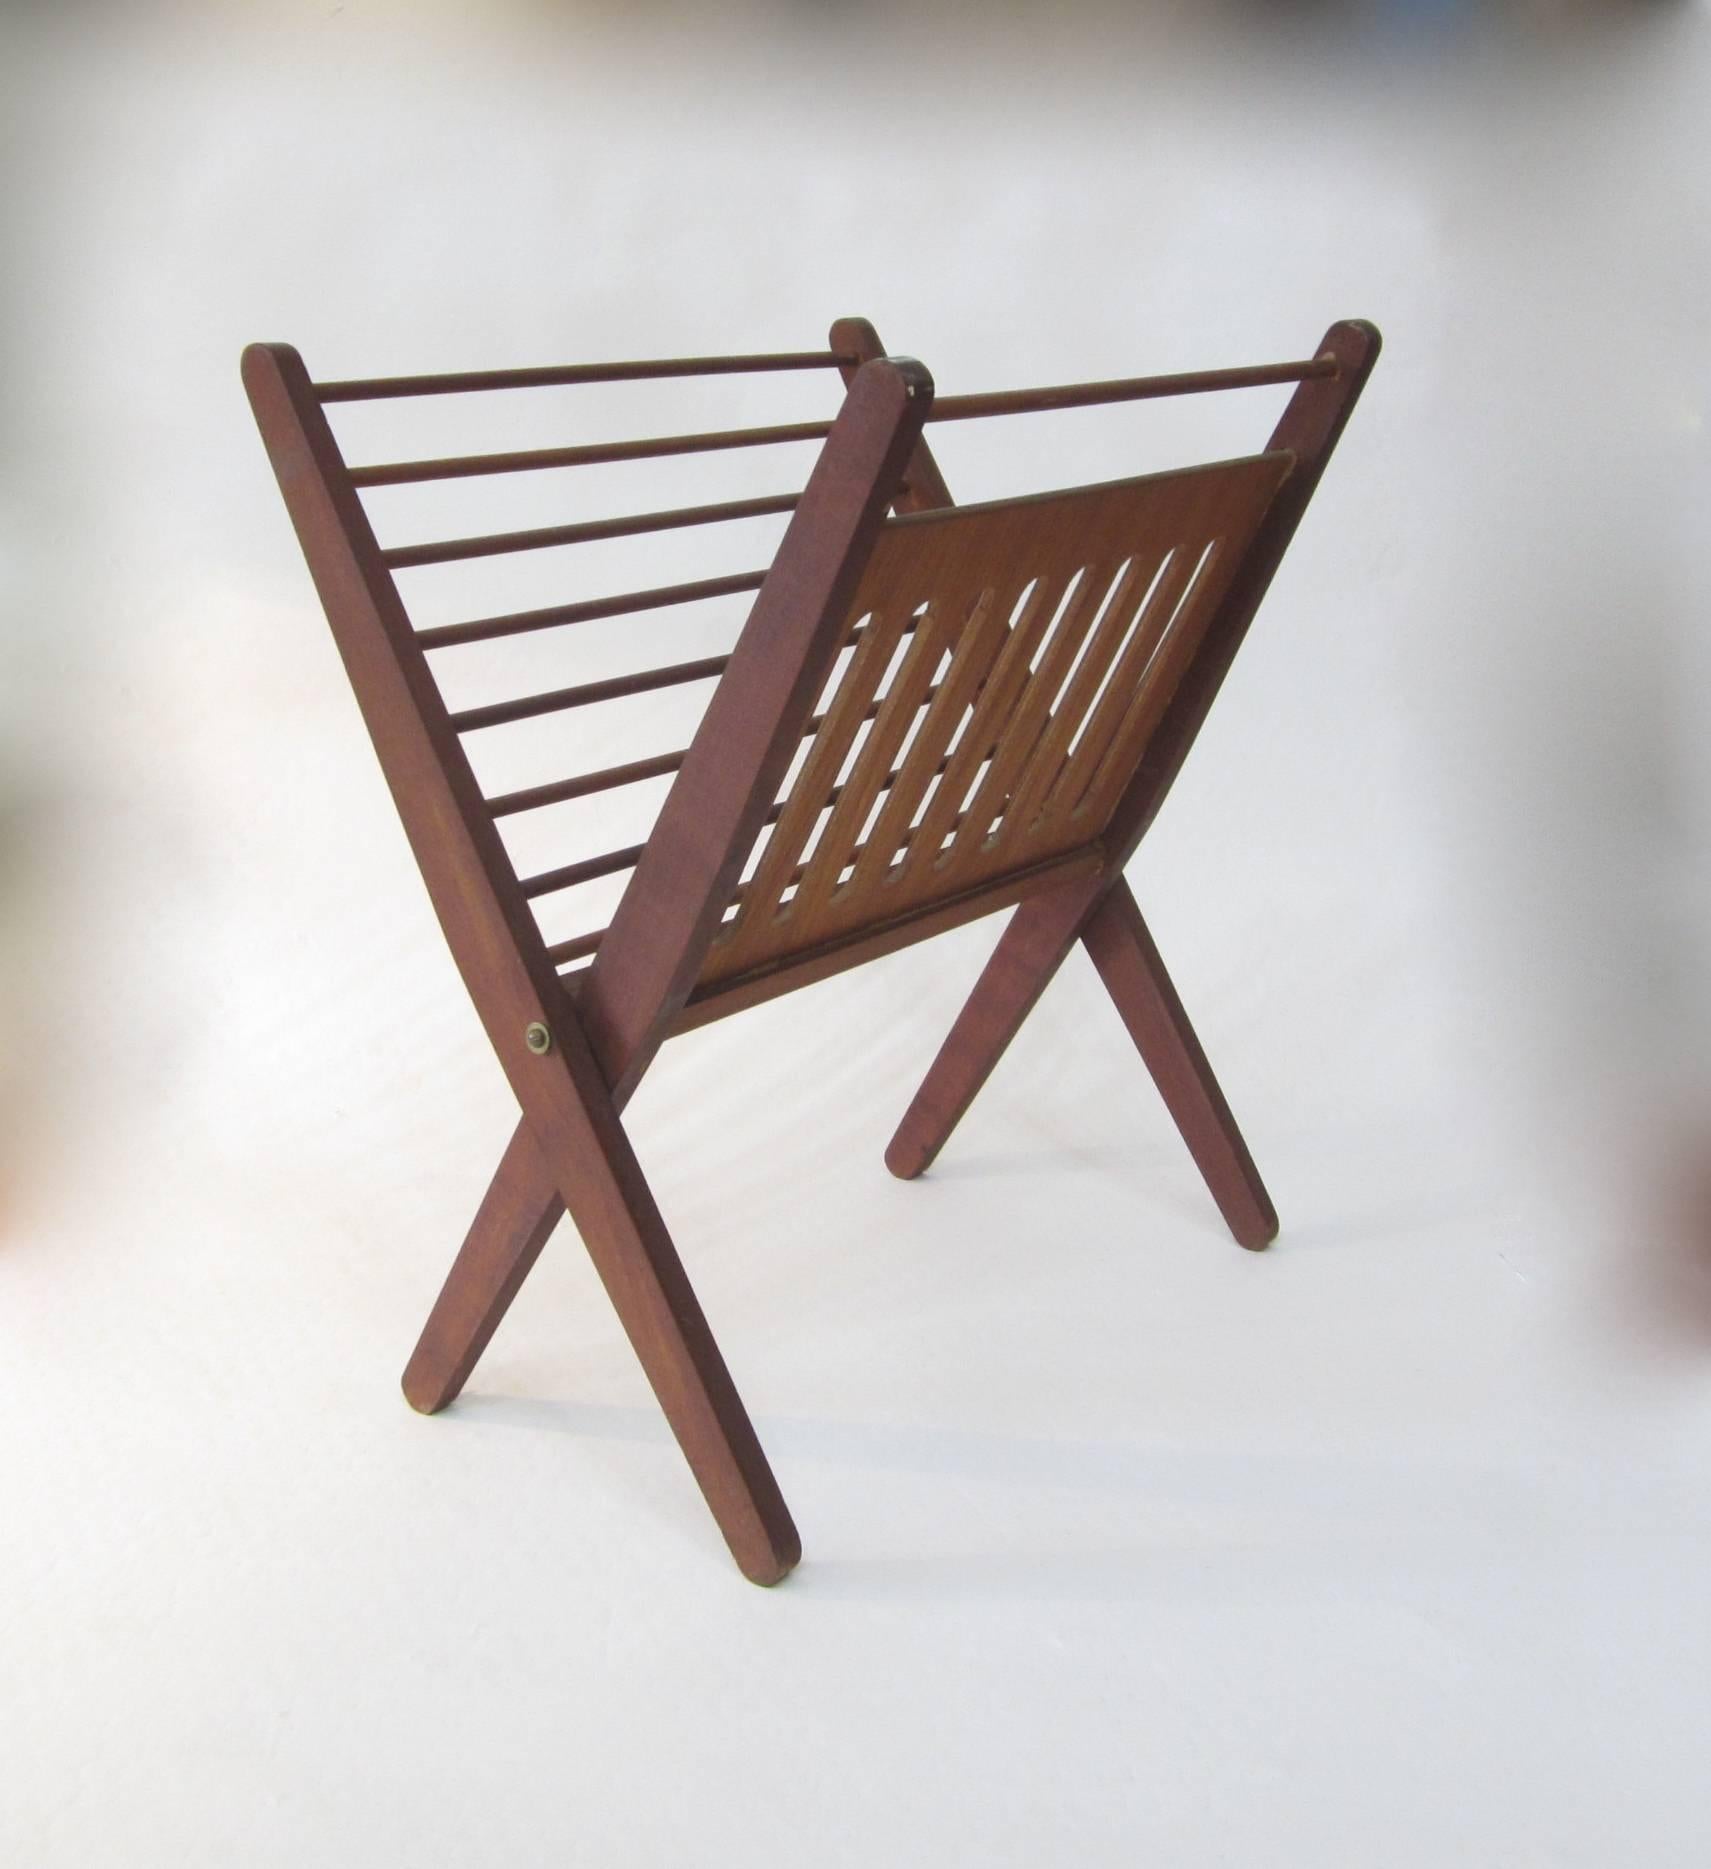 Folding teak magazine holder featuring vertical slats on one side and horizontal rods on the other. Sturdy and solid.